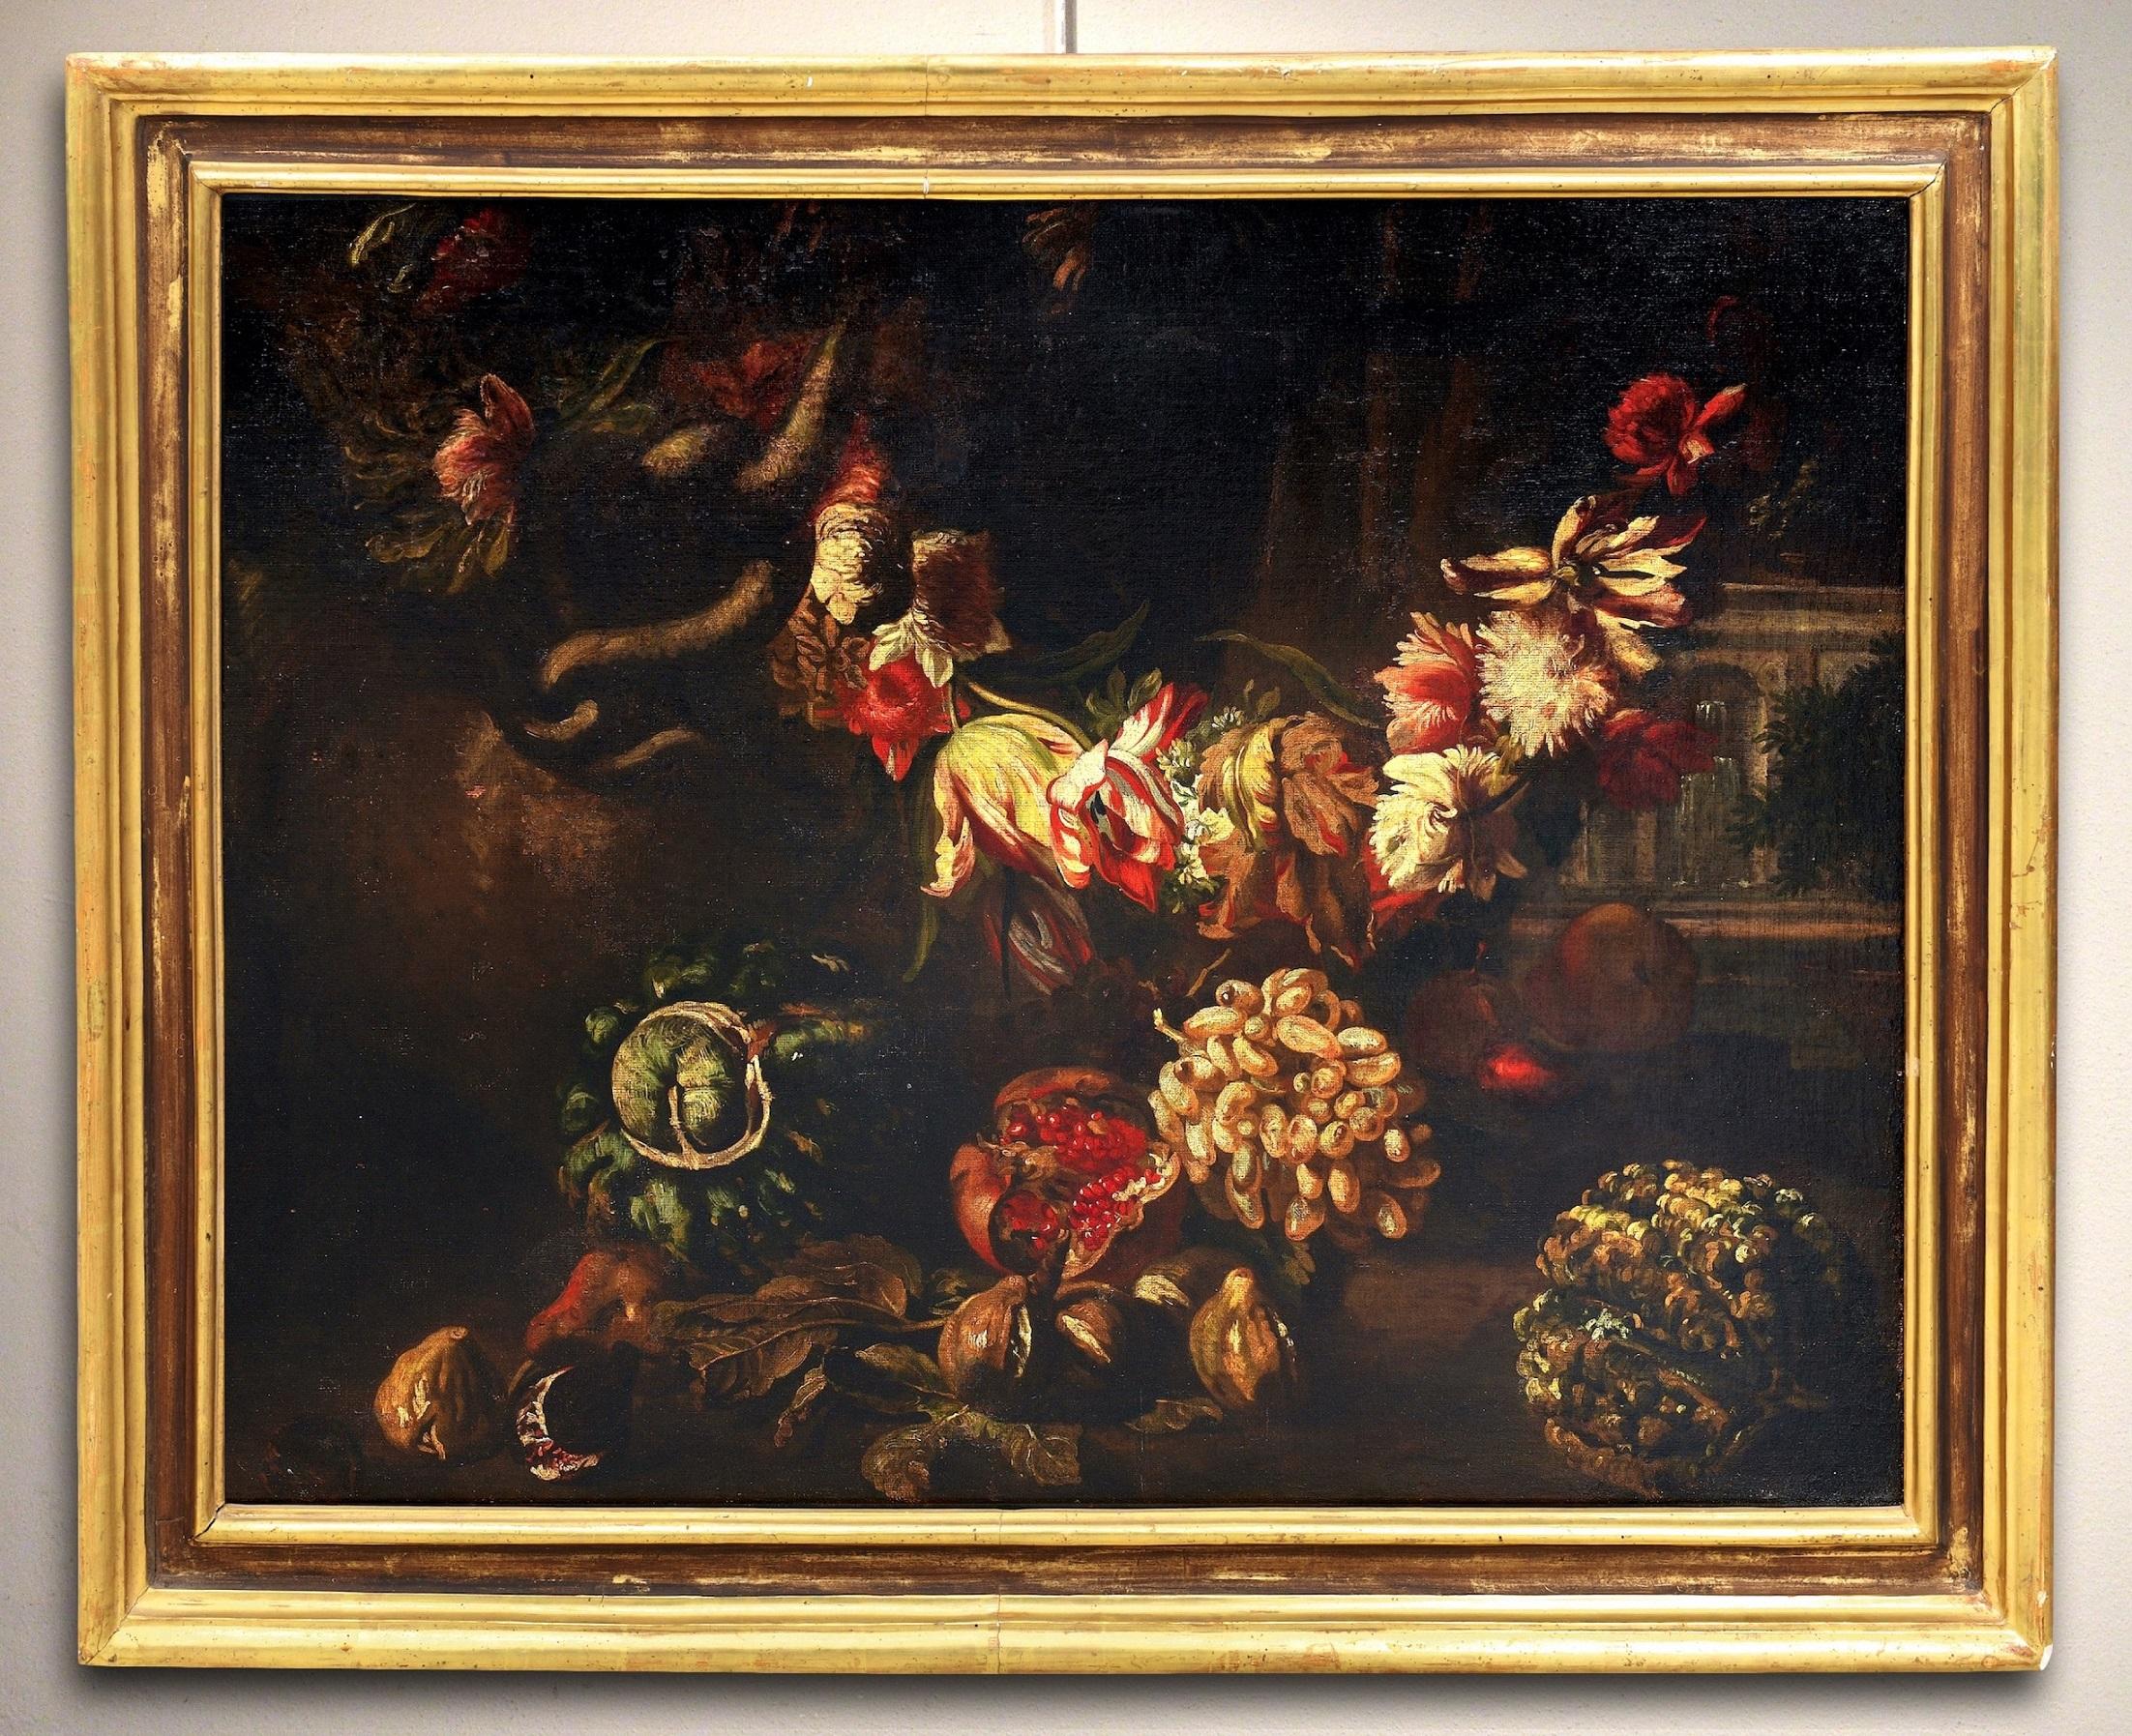 Ascione Still Life Paint Oil on canvas Old master Baroque 17/18th Century Italy - Painting by Aniello Ascione (Naples, news from 1680 to 1708)